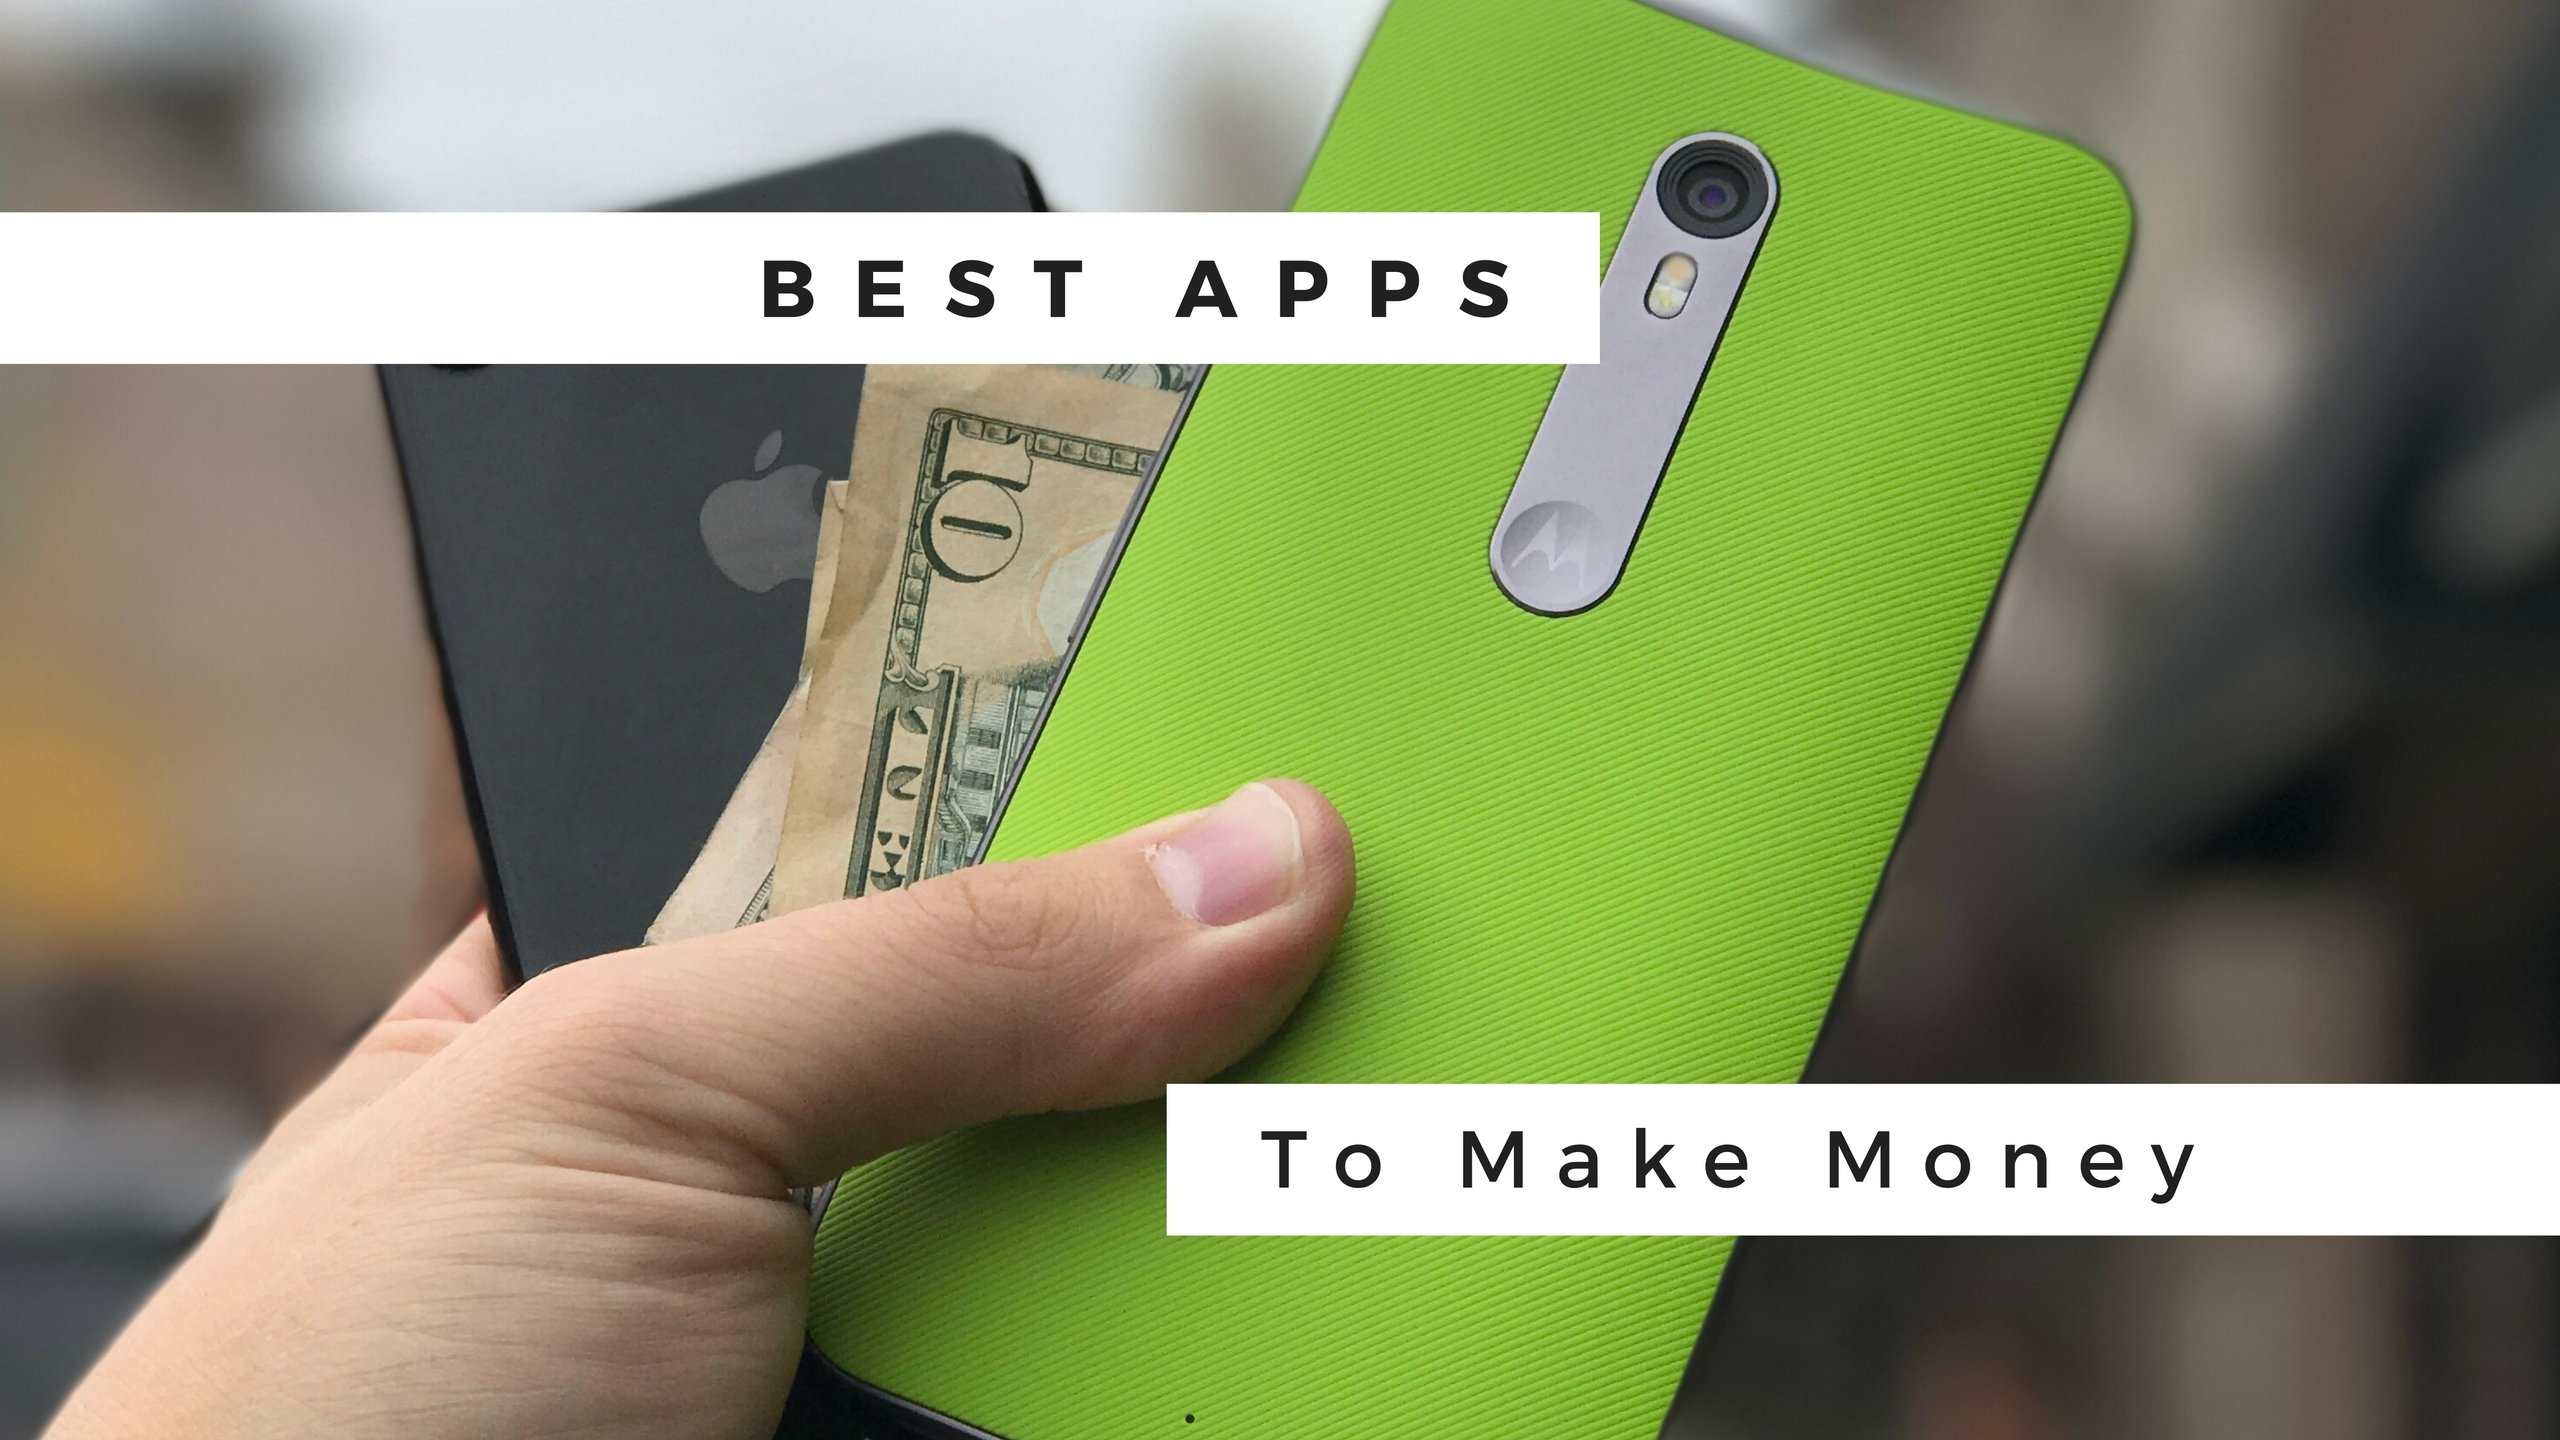 The best apps to make money on your iPhone or Android.